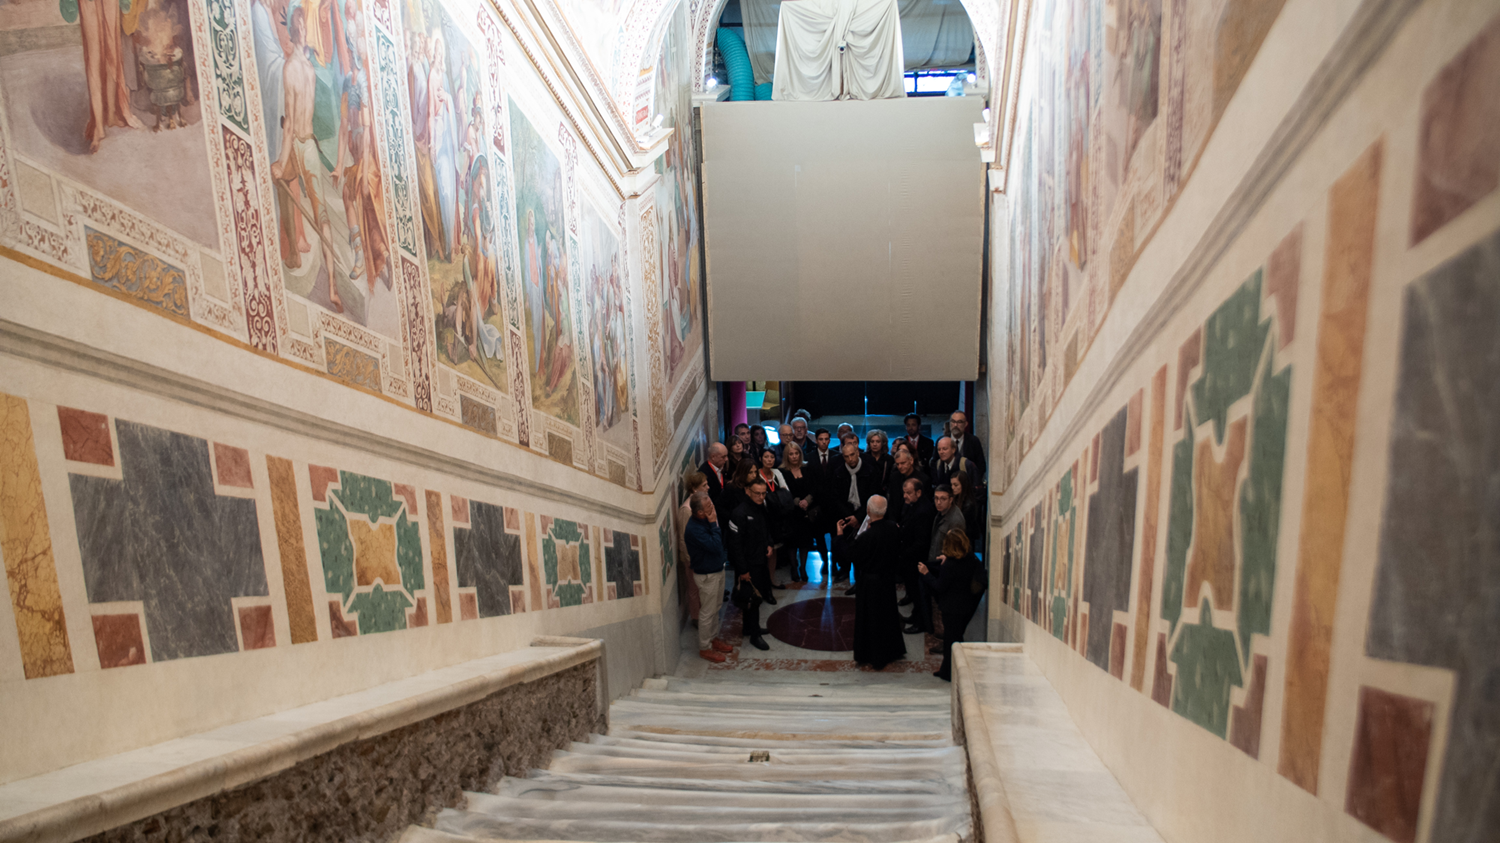 iGuzzini enhances the Pontifical Sanctuary of the Holy Stairs  with new lighting